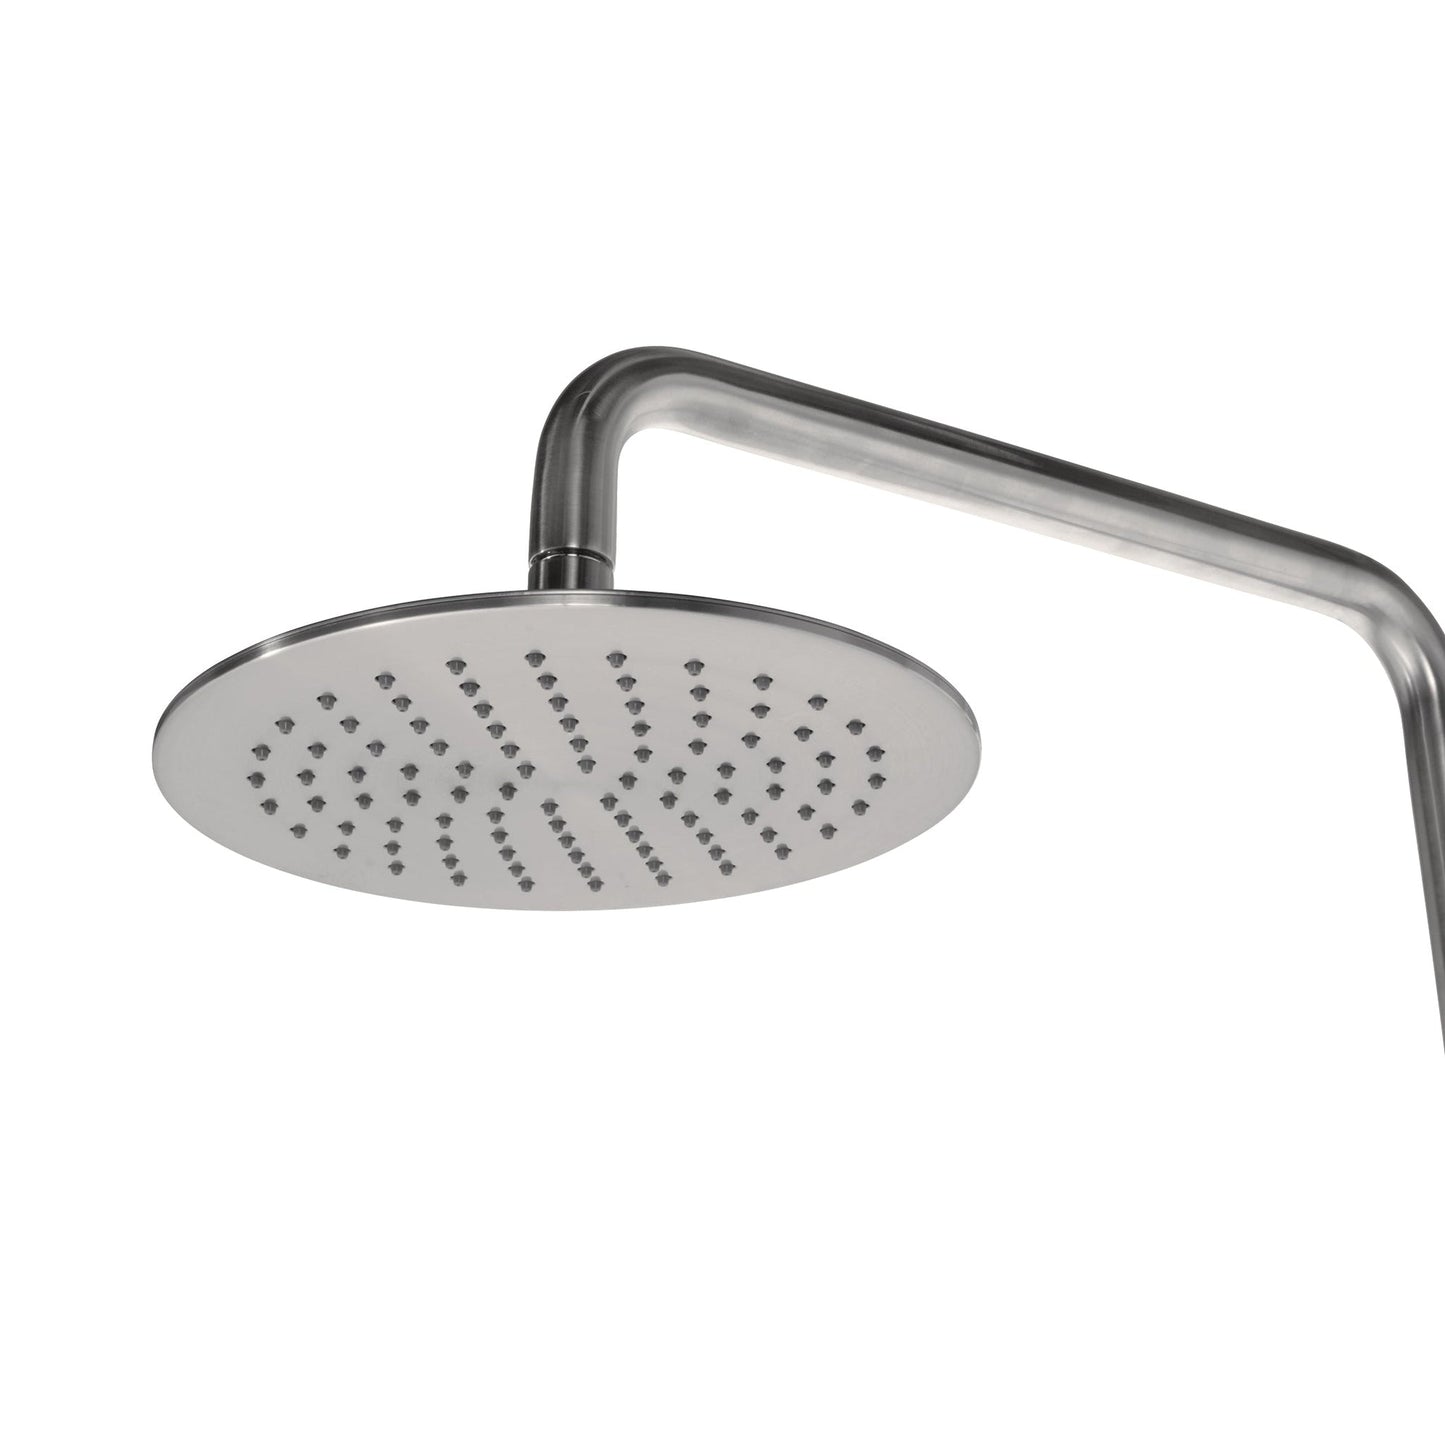 PULSE ShowerSpas Aquarius 1.8 GPM Shower System in Brushed Nickel Finish With Rain Shower Head and Single Function Hand Shower